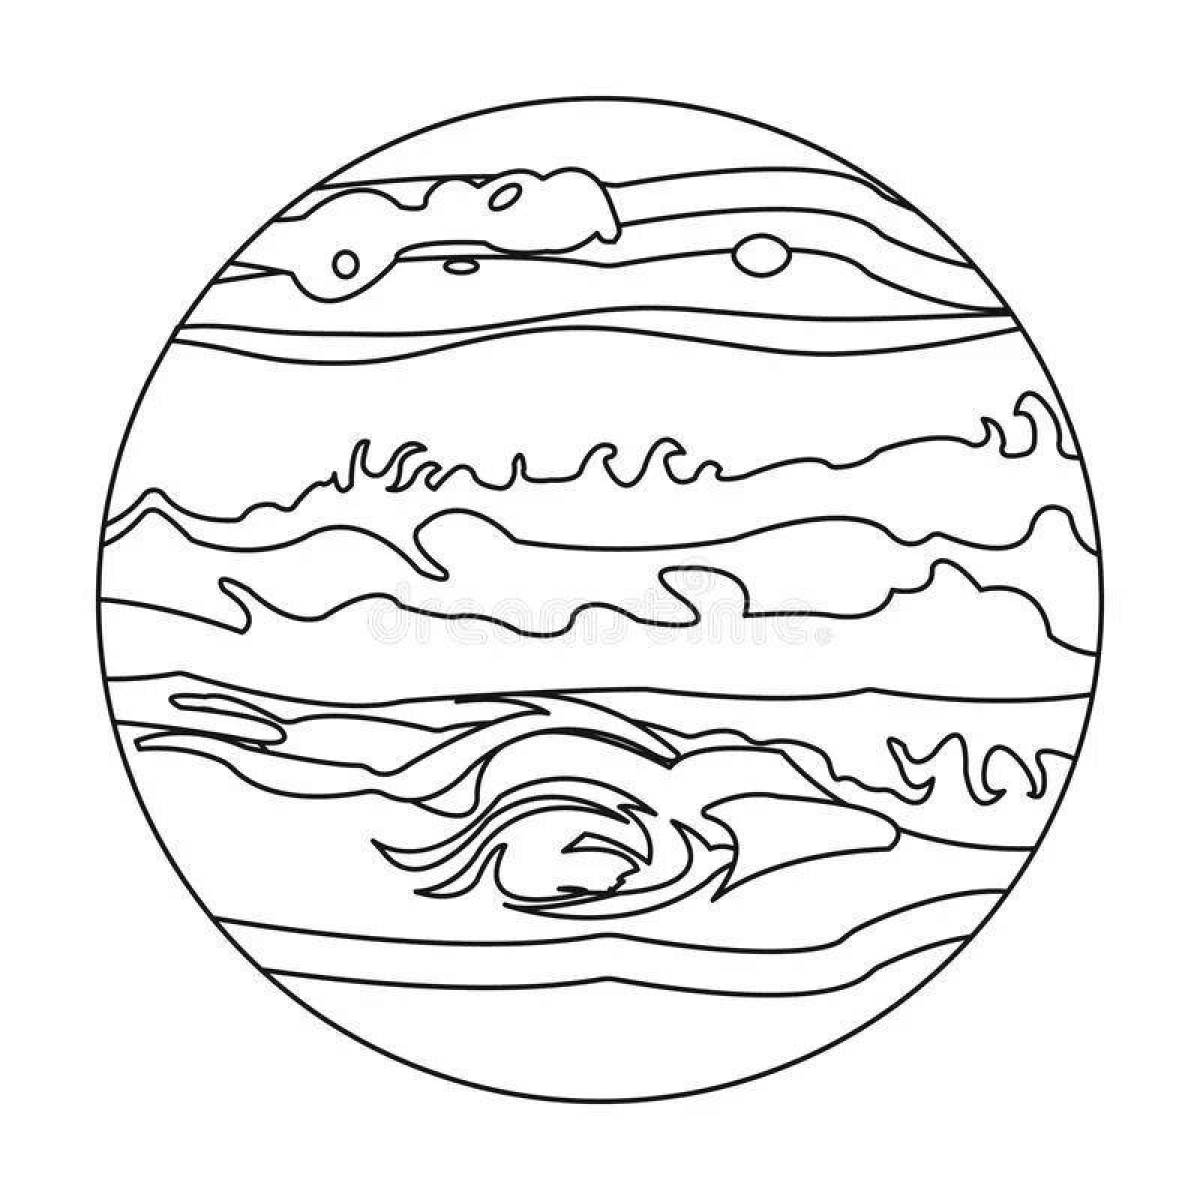 Colorfully marked jupiter coloring book